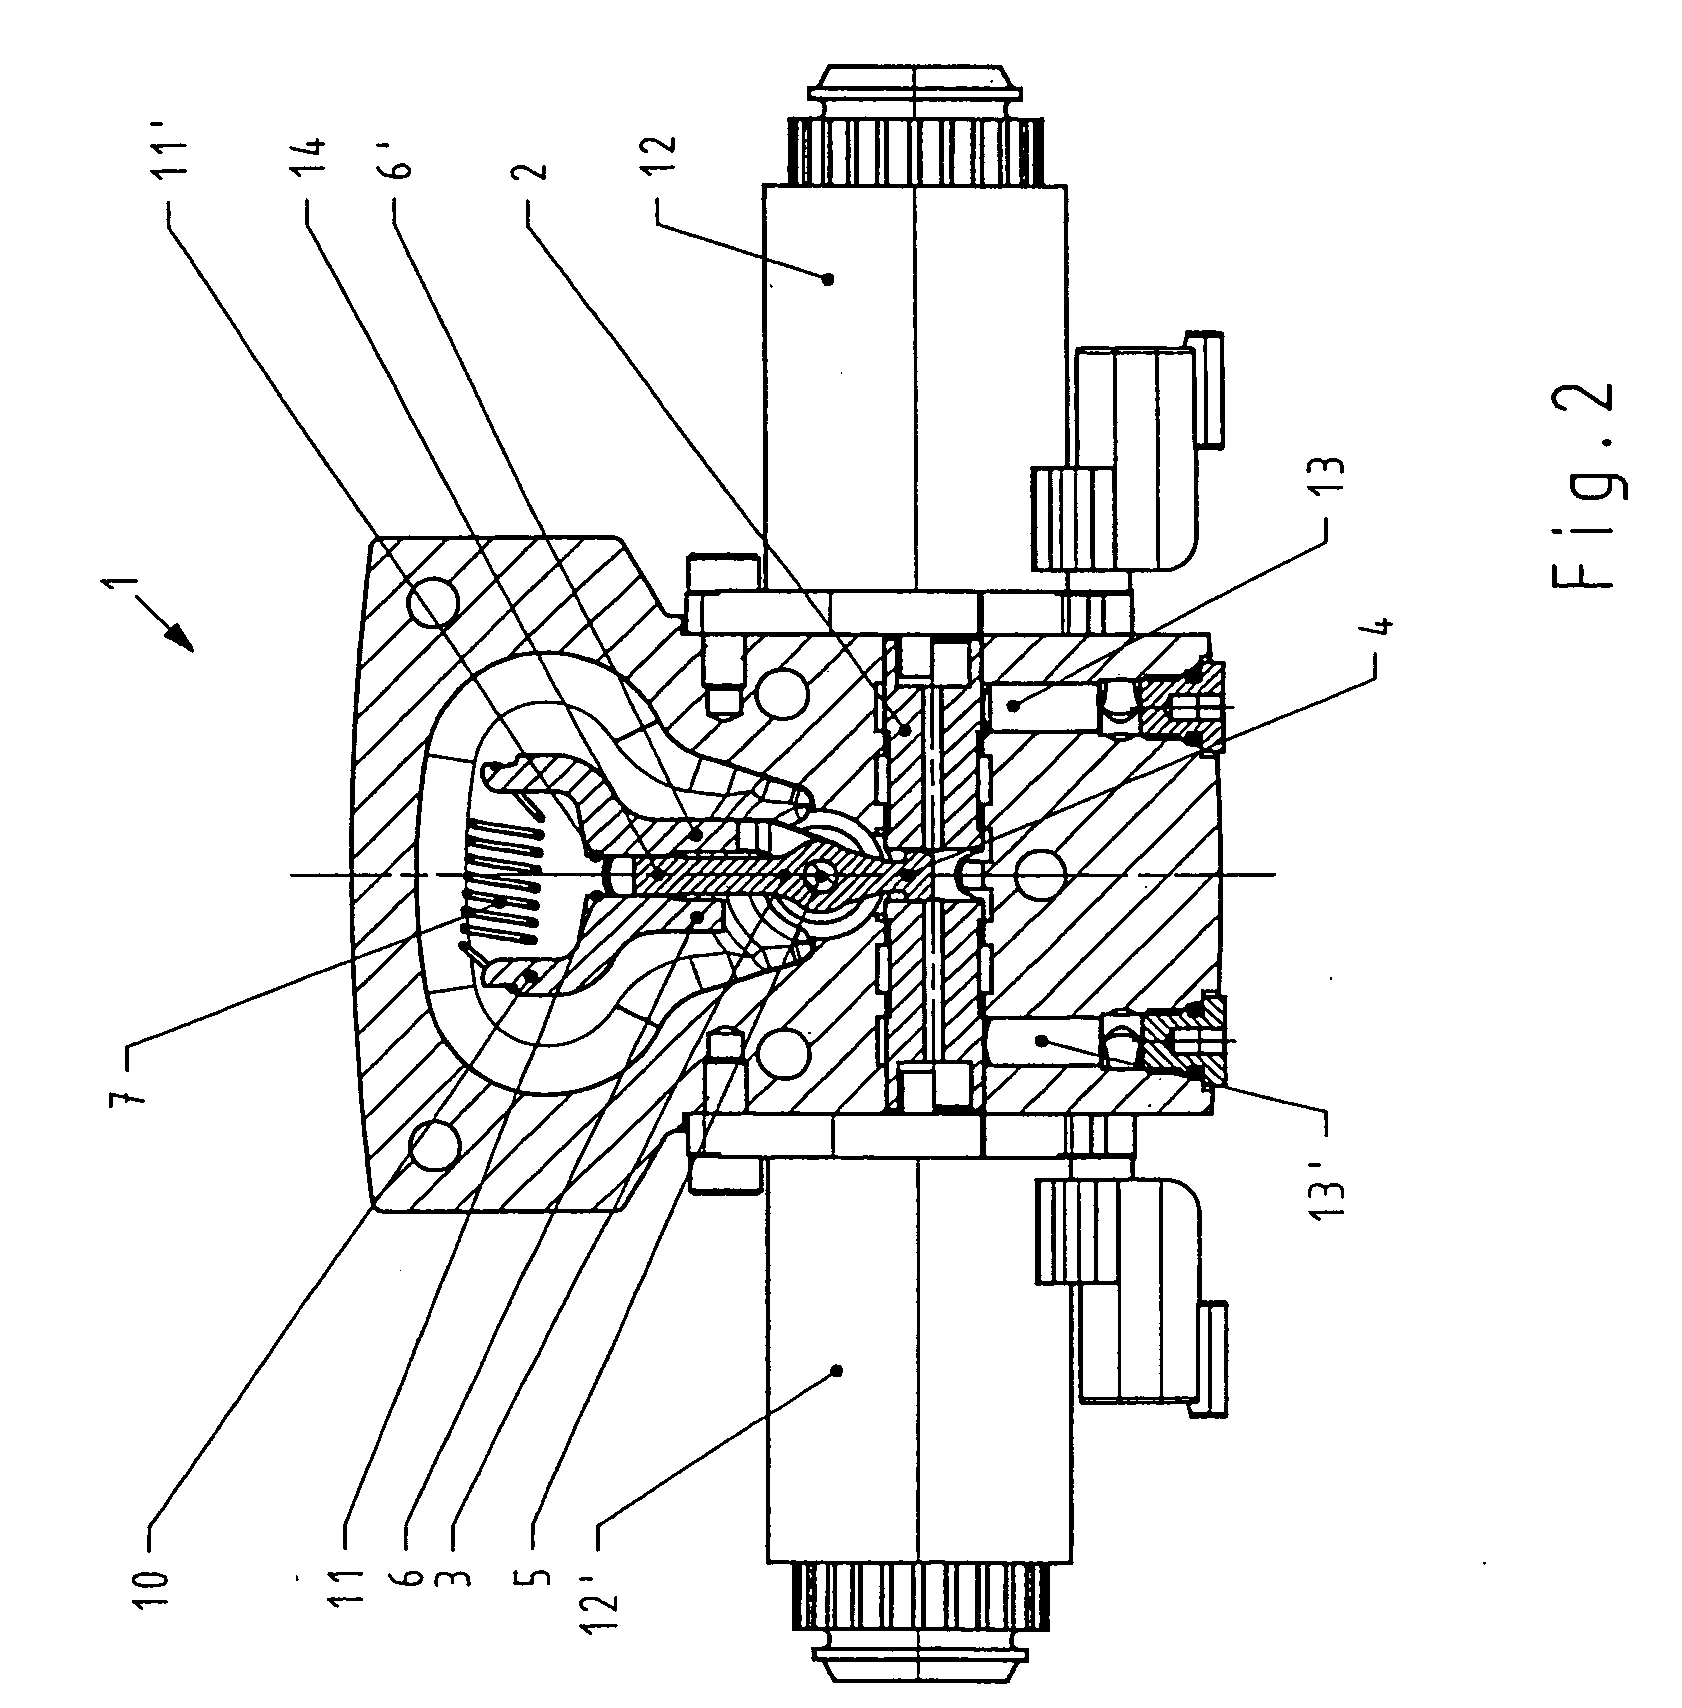 Axial piston machine having a device for the electrically proportional adjustment of the volumetric displacement